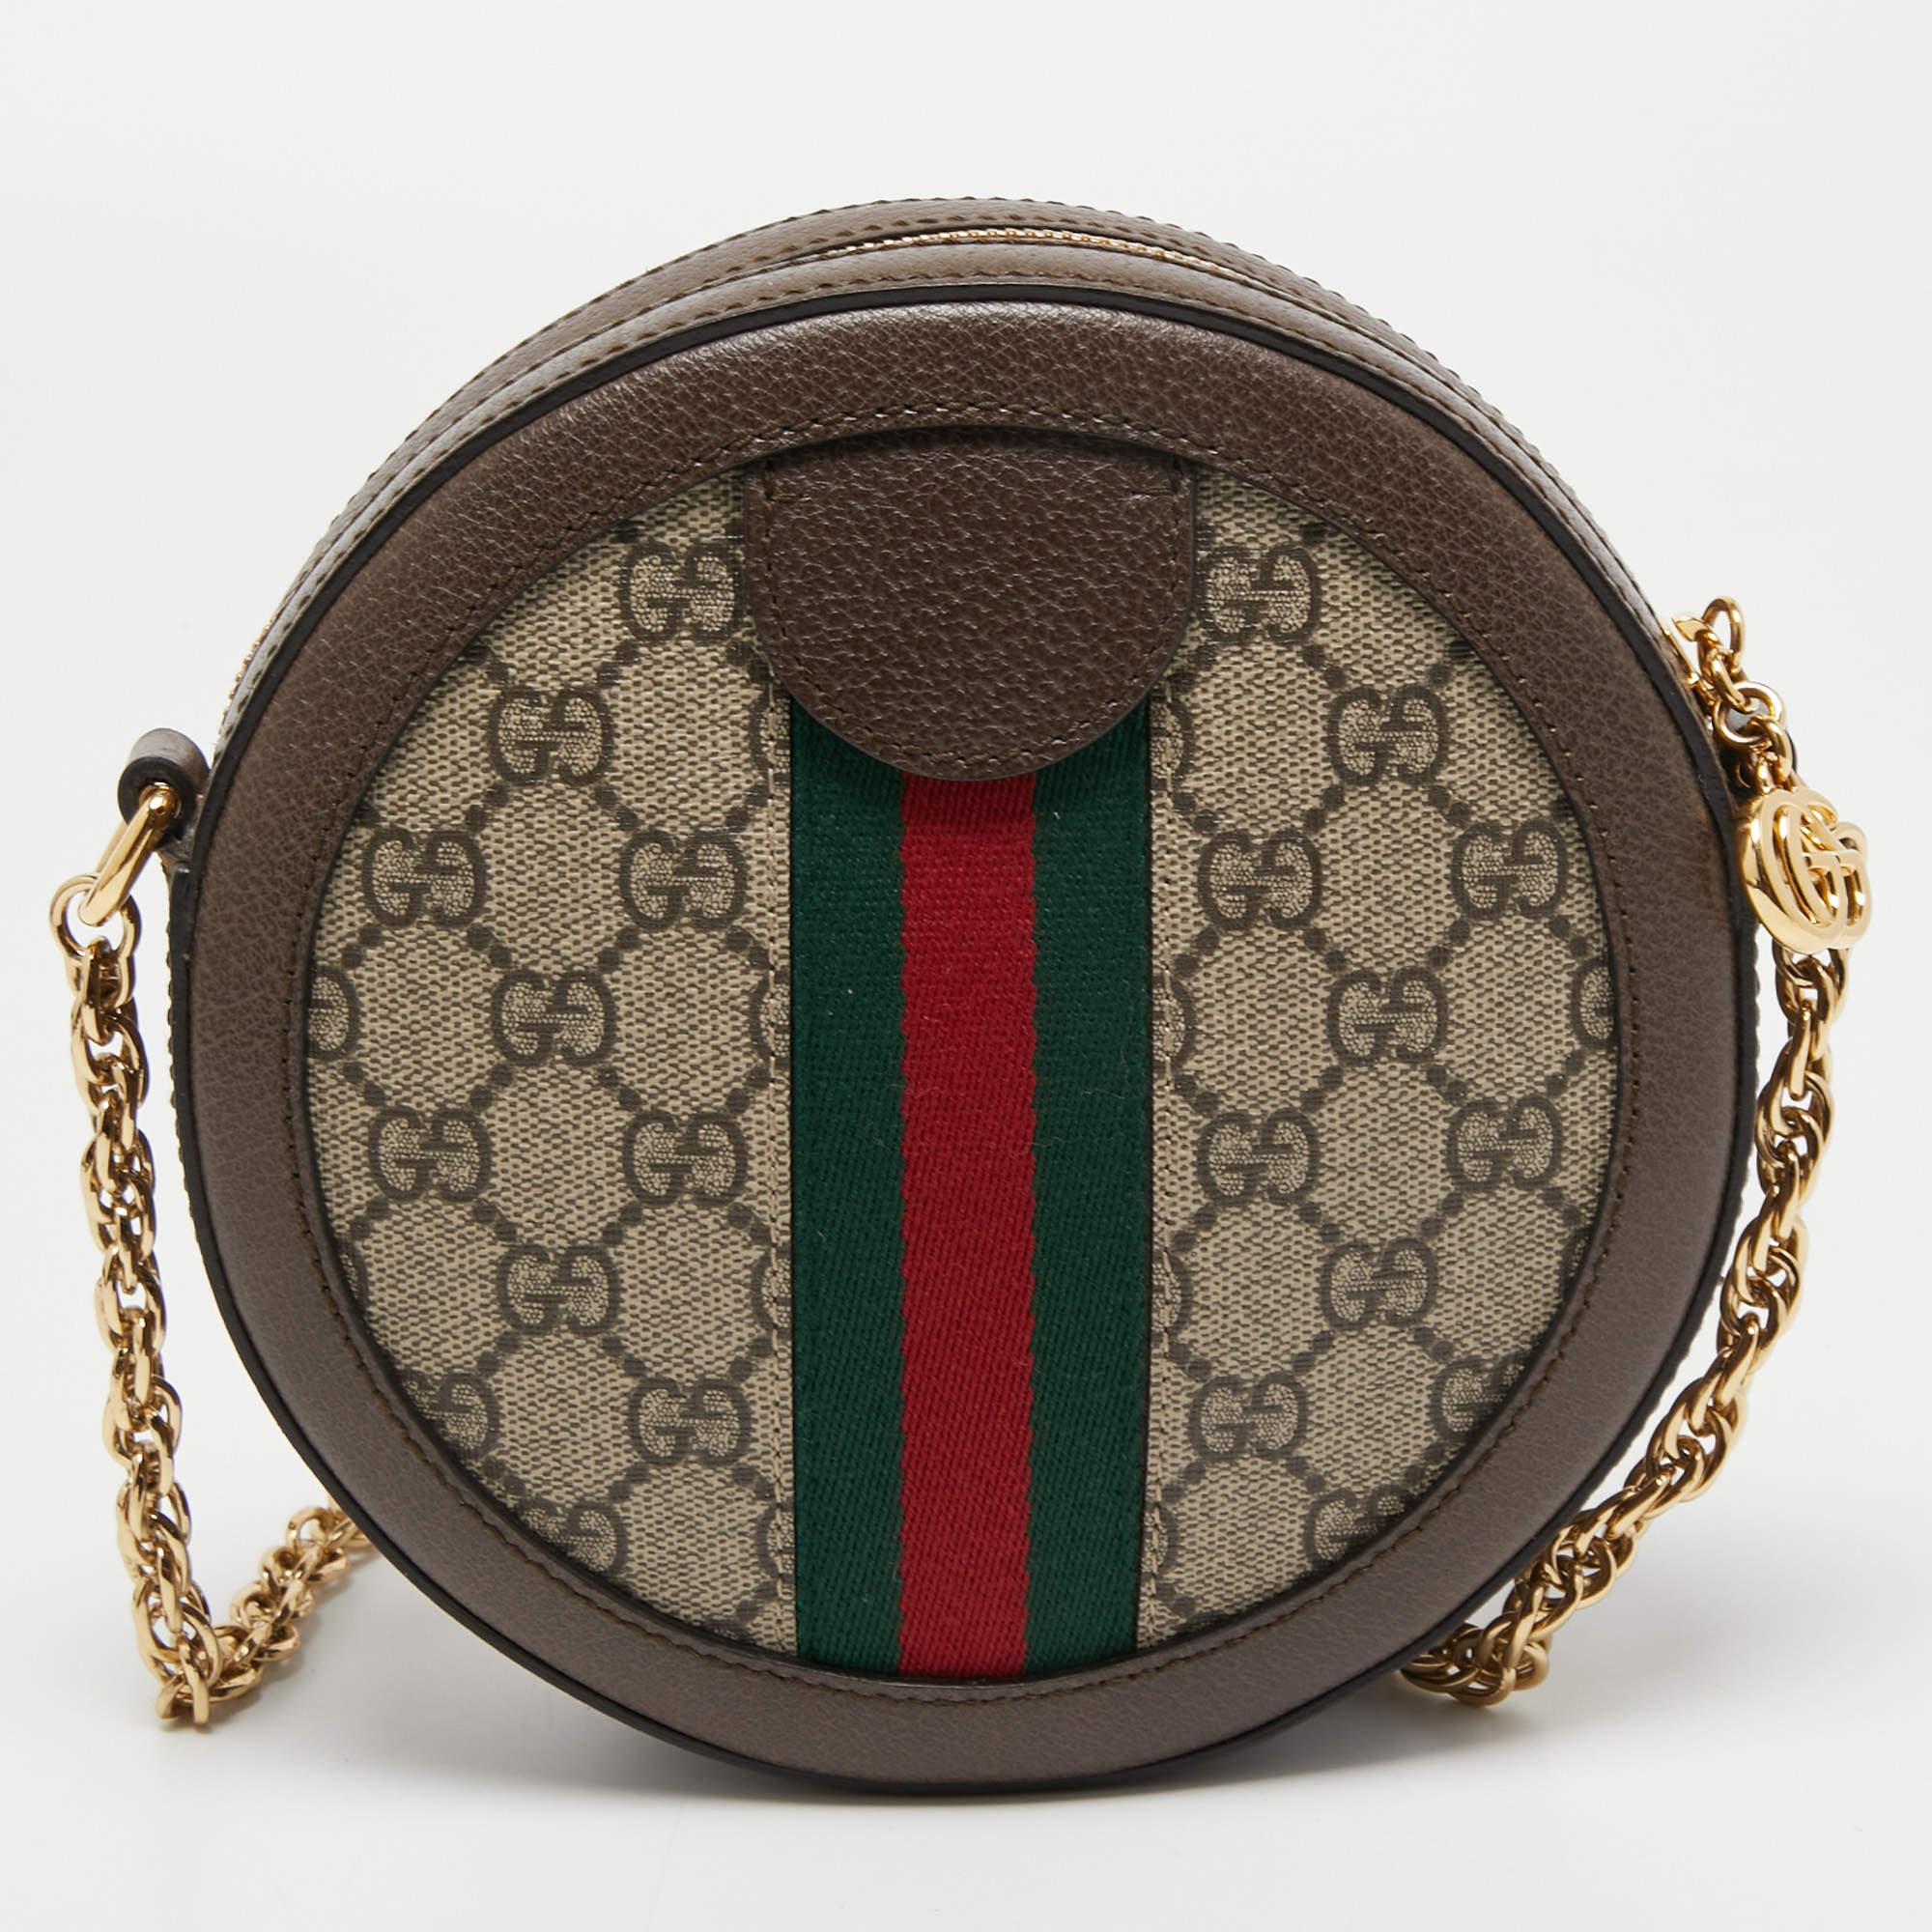 Gucci's iconic collections exhibit the label's varied aesthetics and skill. This mini Ophidia bag is overlaid with signature elements, thus giving it an exceptional look. It is created using brown coated canvas and leather with the Web trim adorning